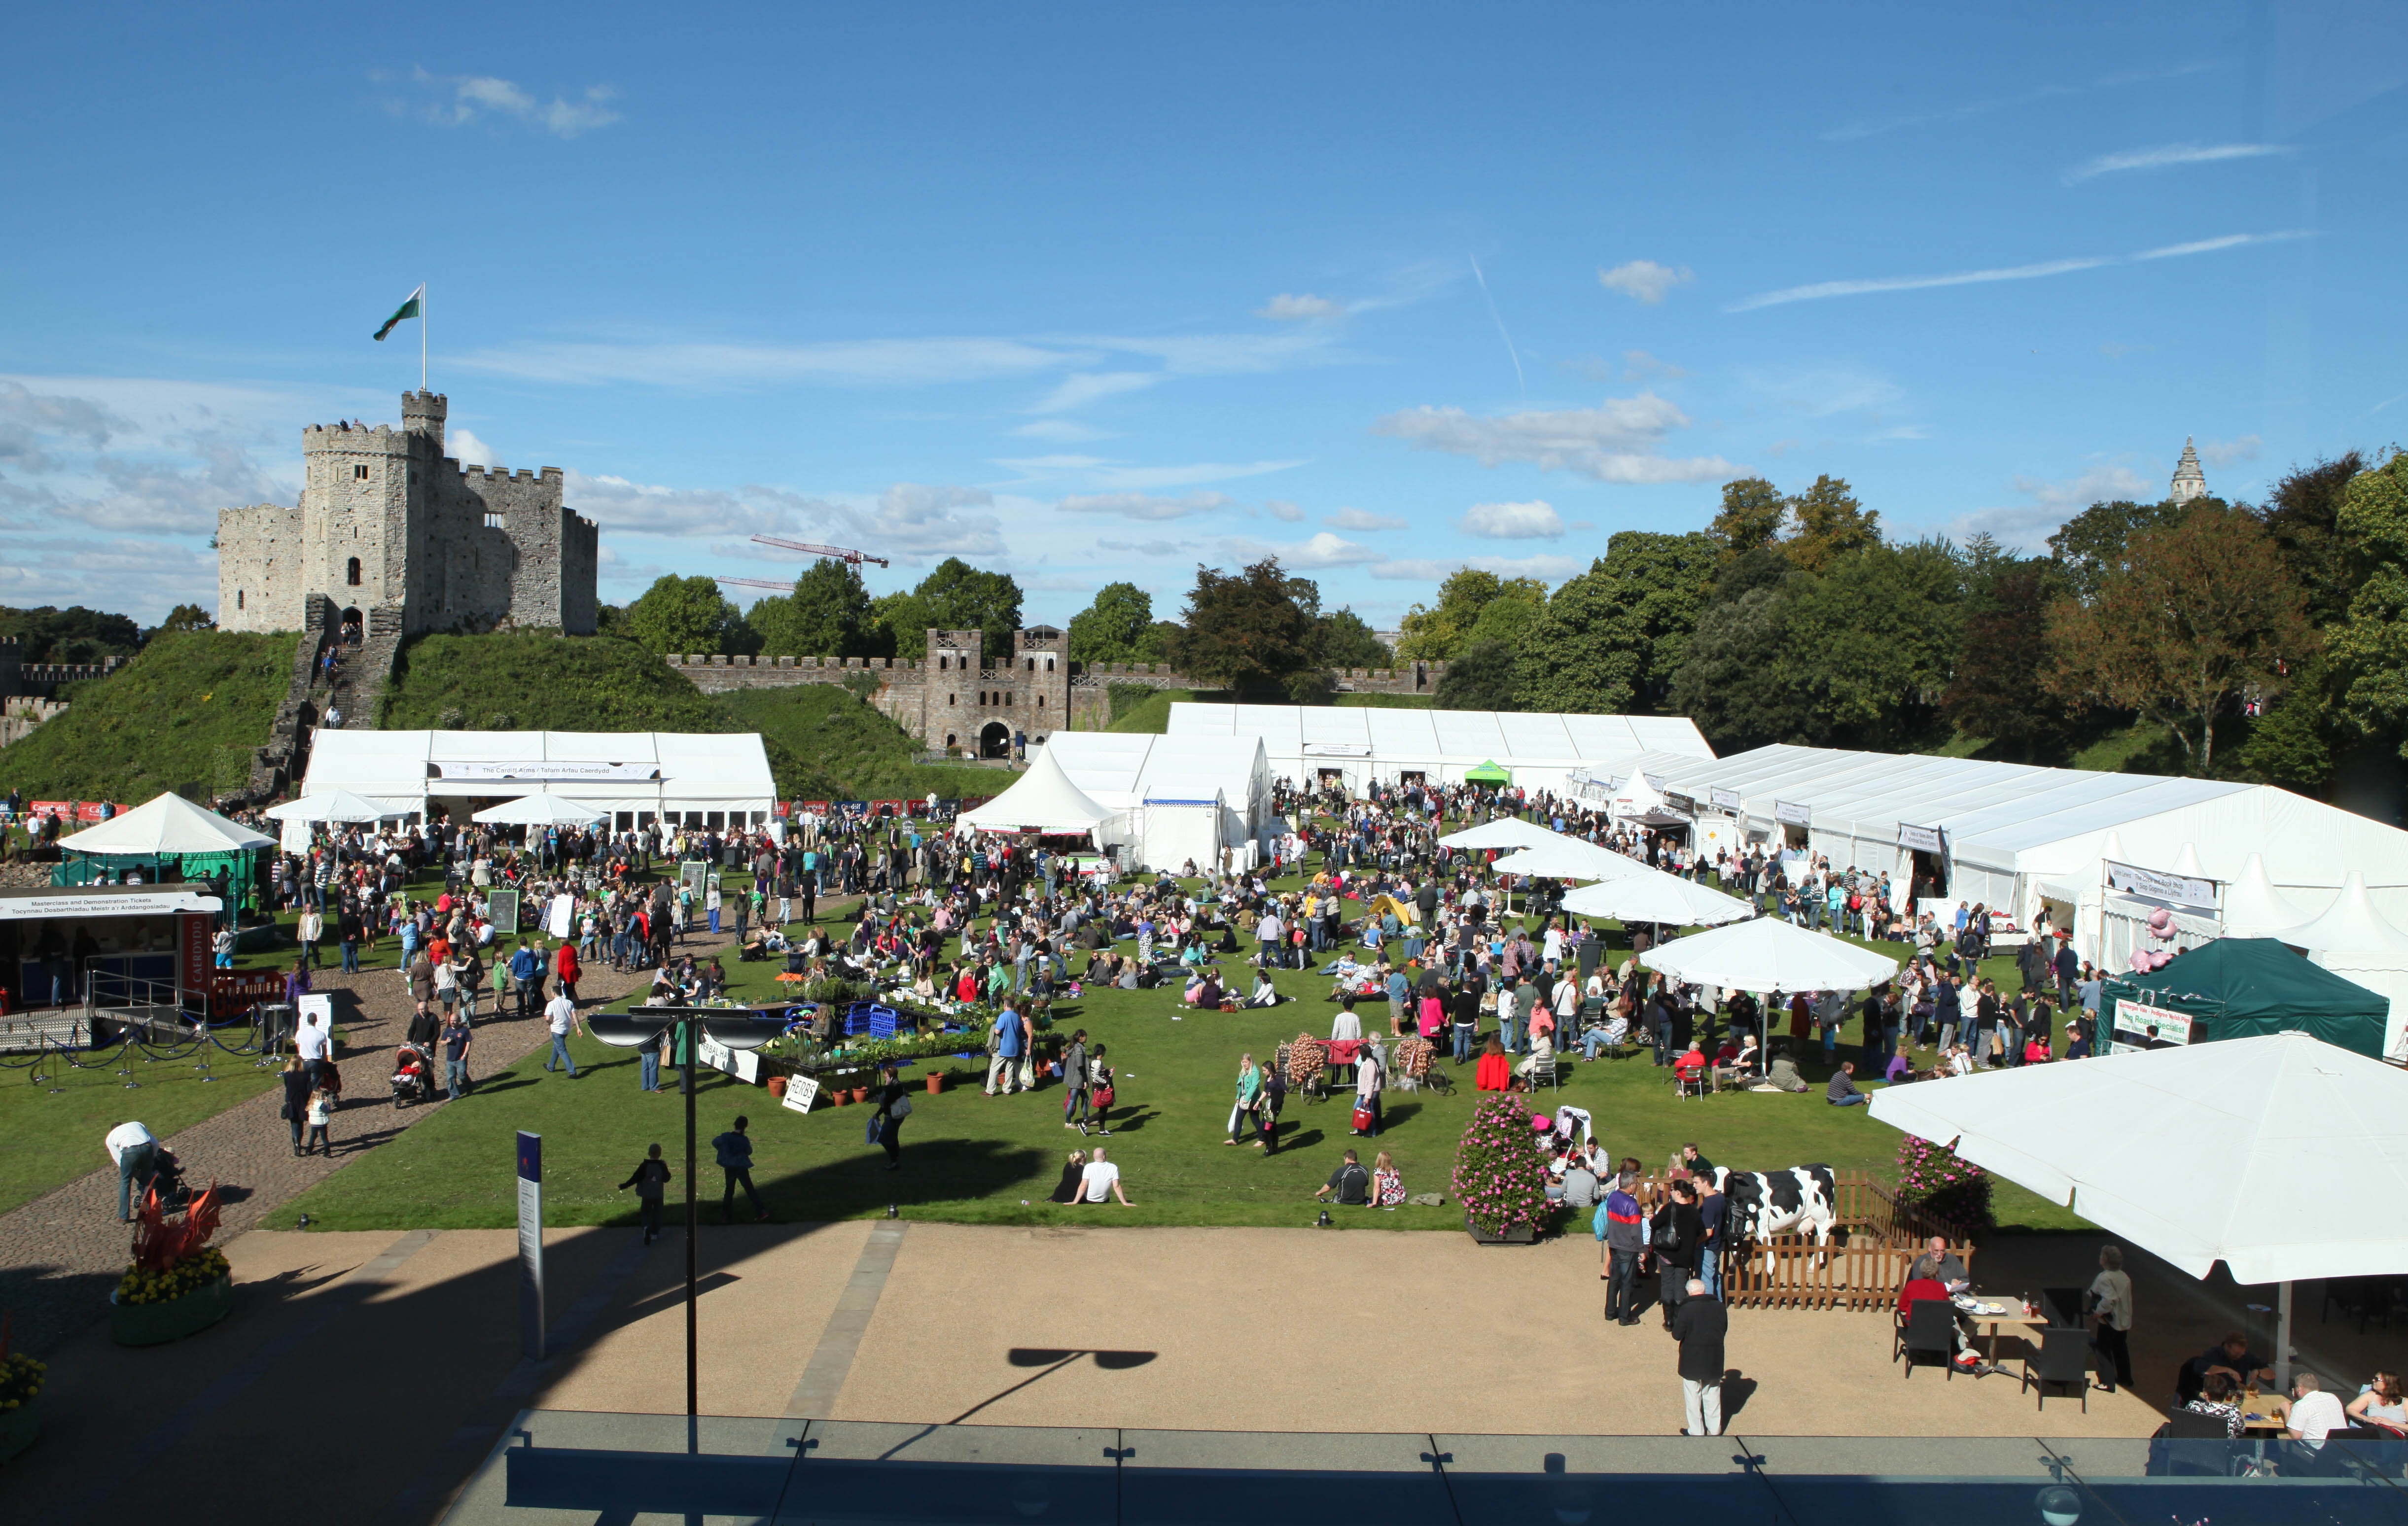 The crowds and vendors at the Great Cheese British Festival. Credit: Visit Wales.